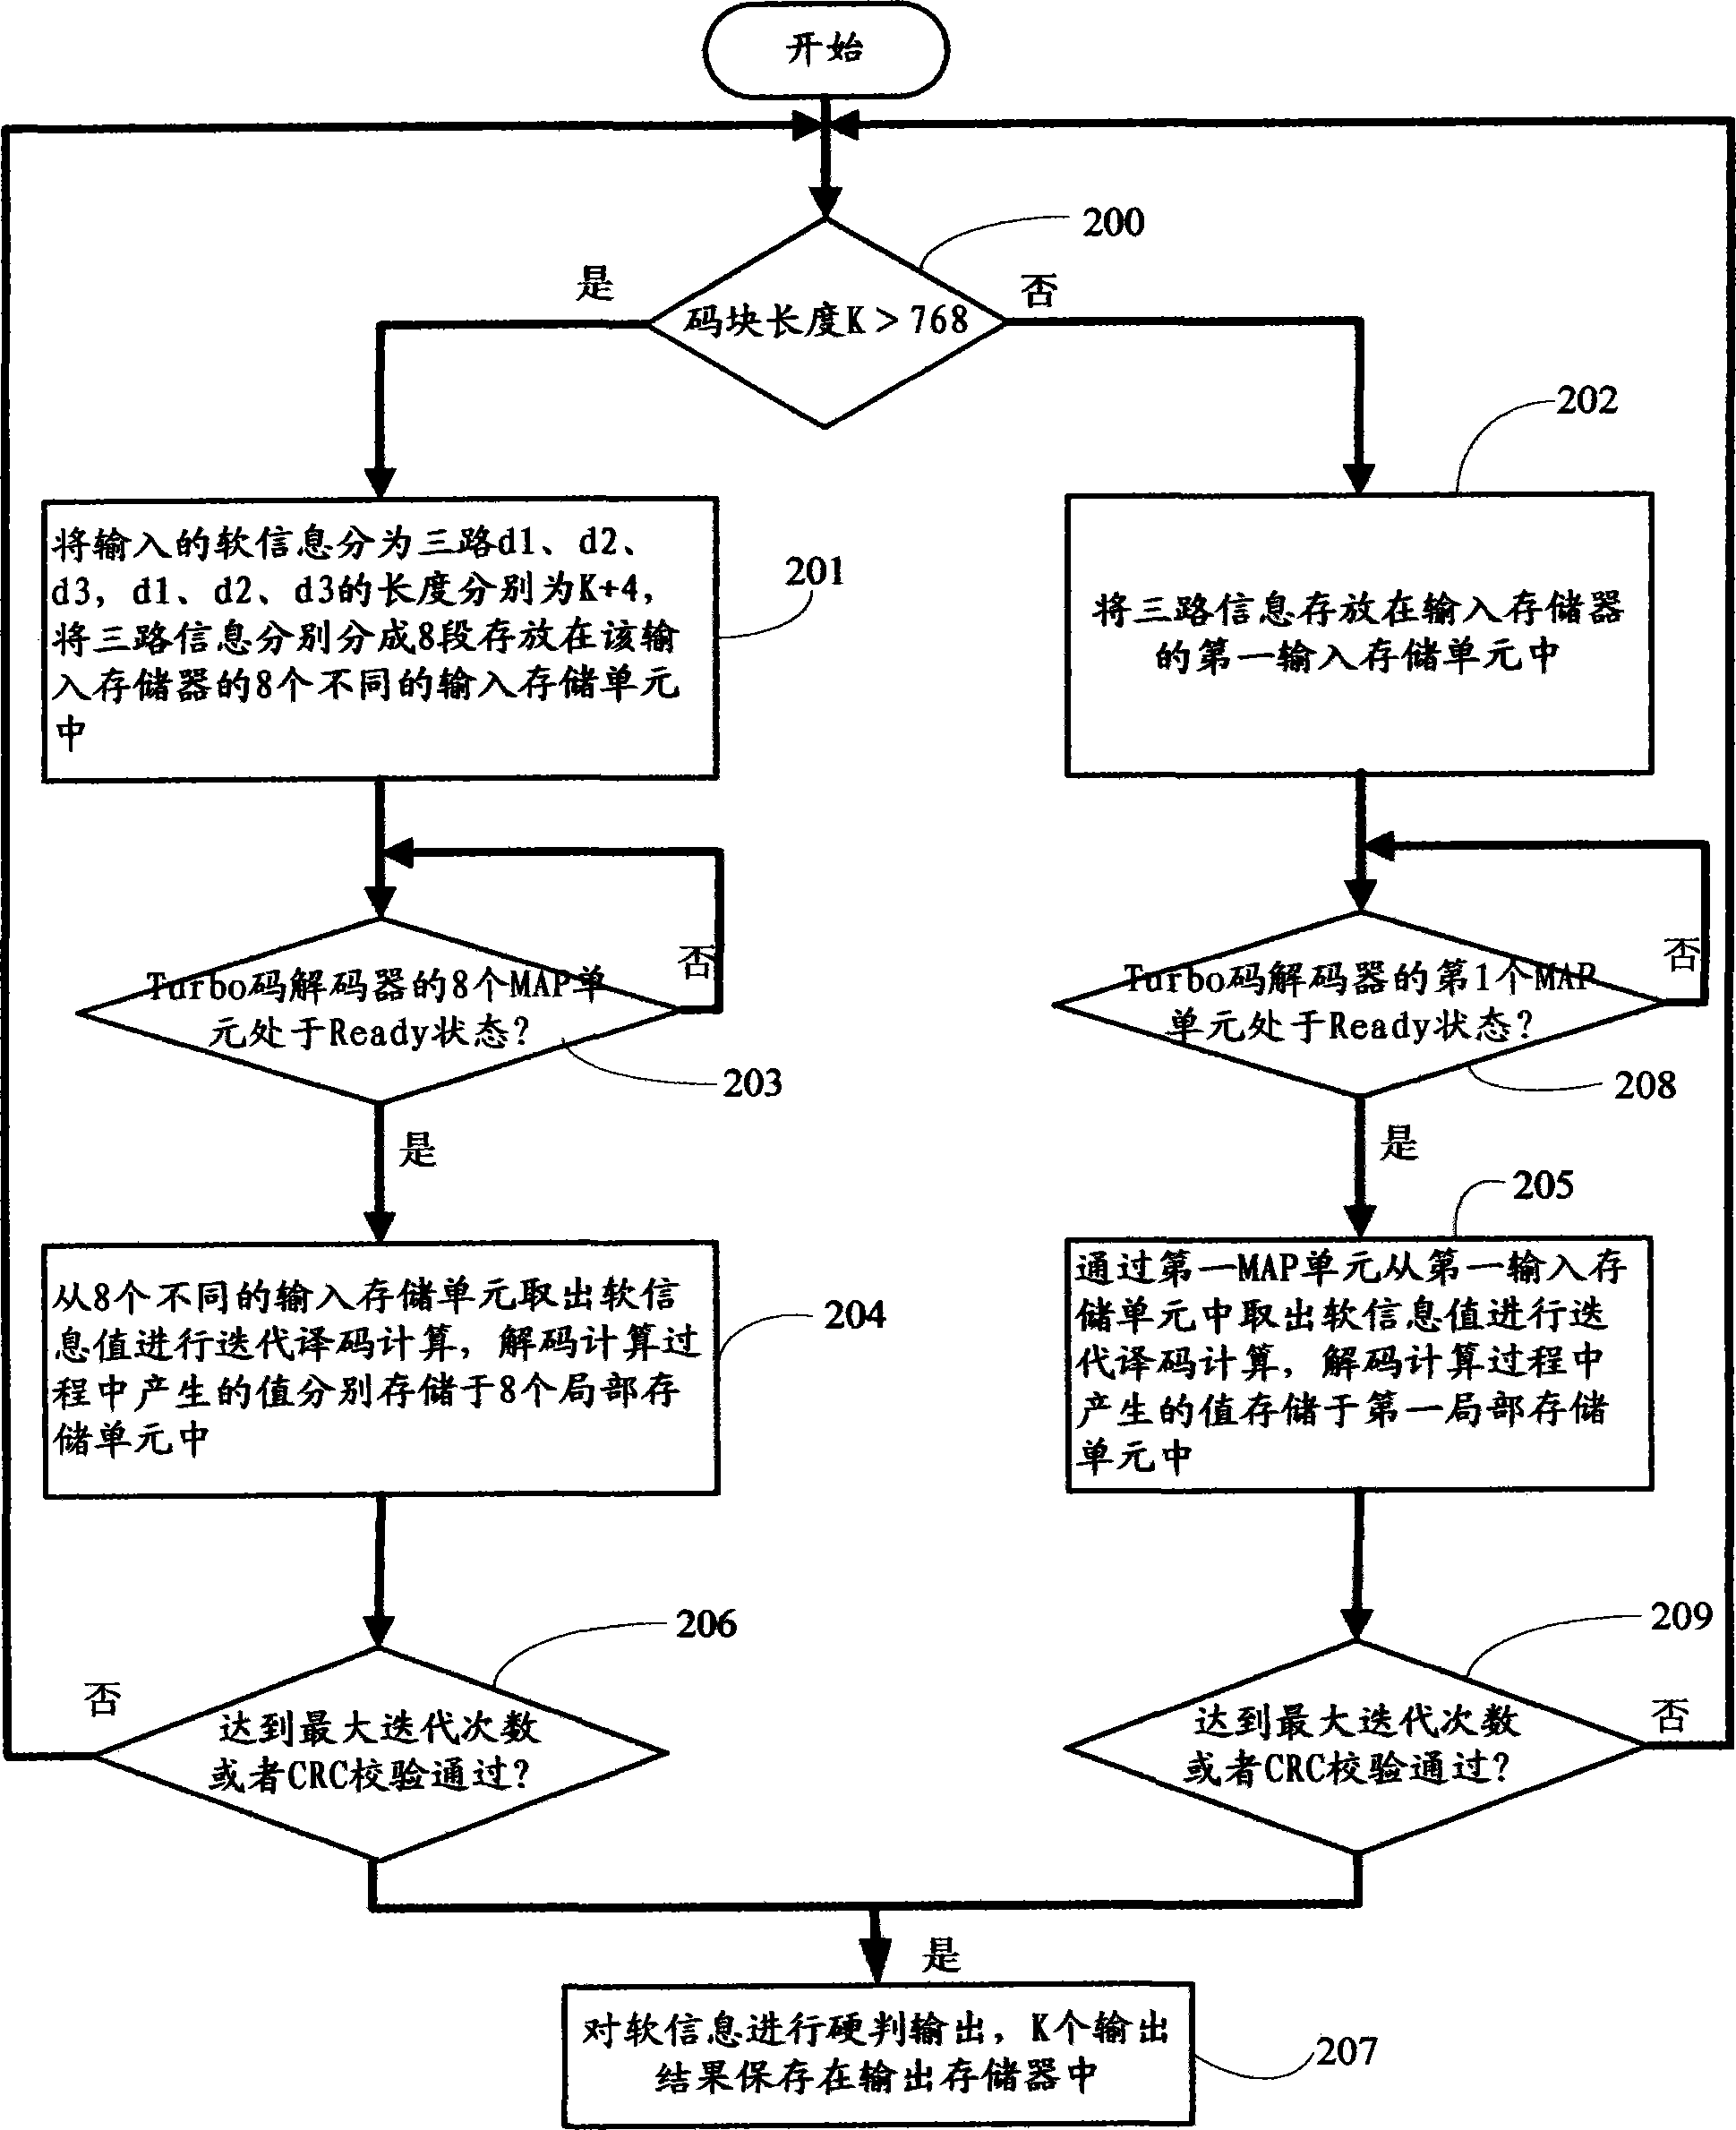 System and method for decoding high-speed parallel Turbo codes in LTE (Long Term Evolution) system